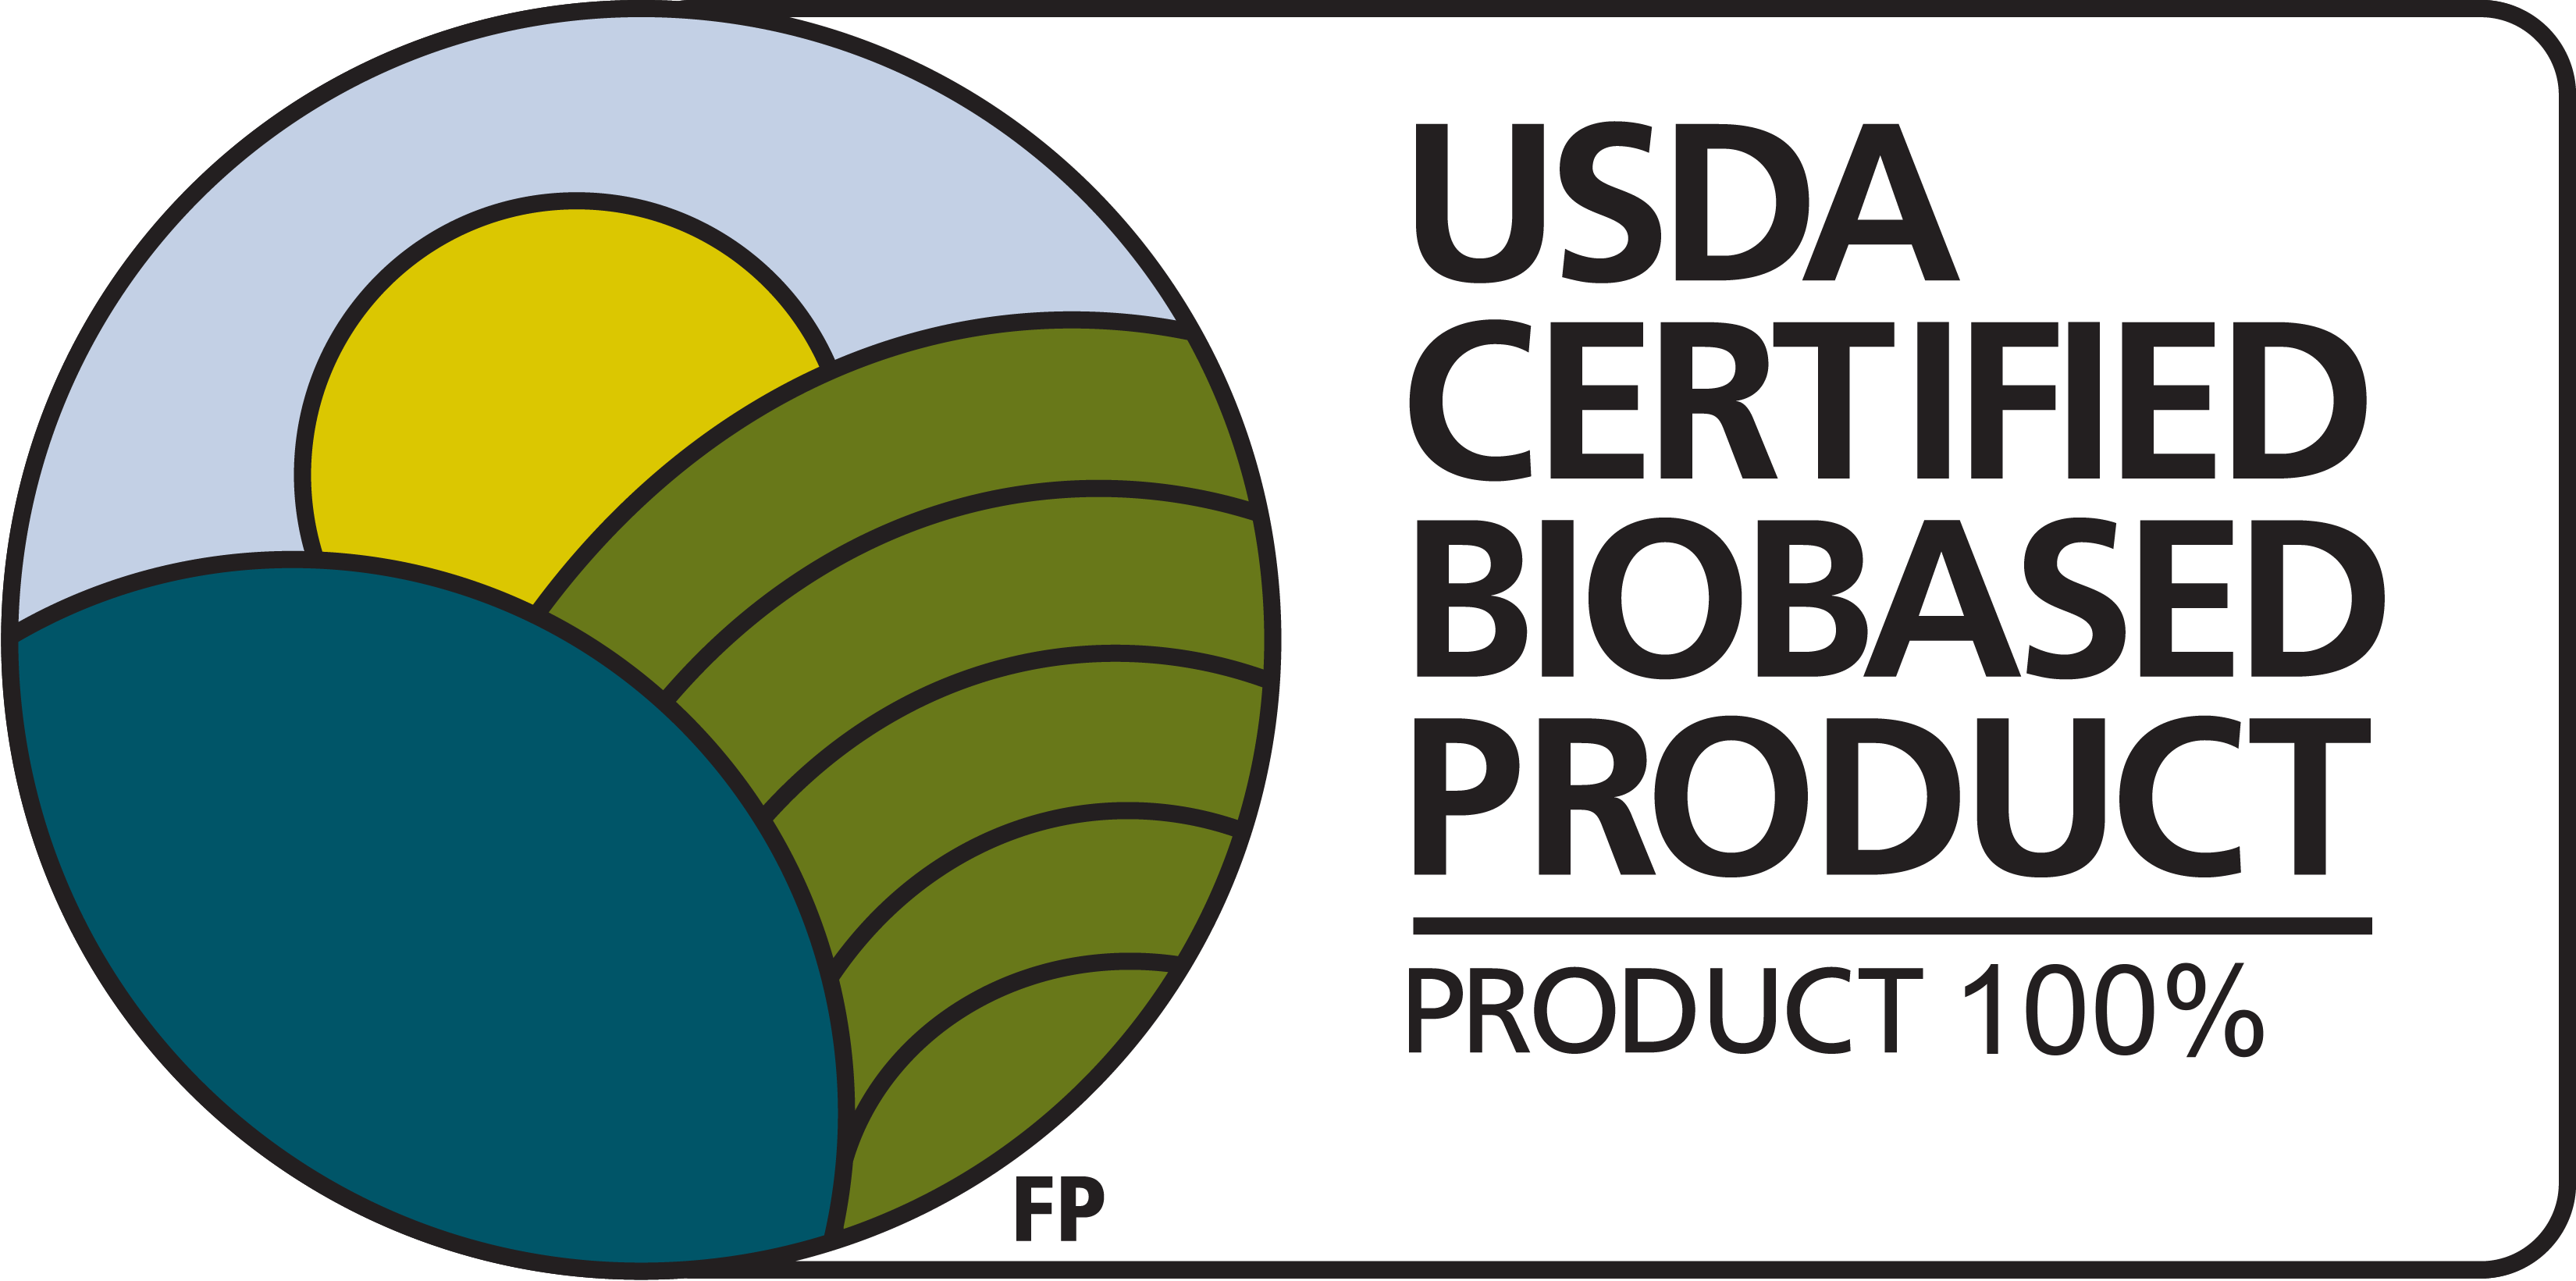 Honest Glow On Body Oil is a USDA Certified Biobased Product Label shown